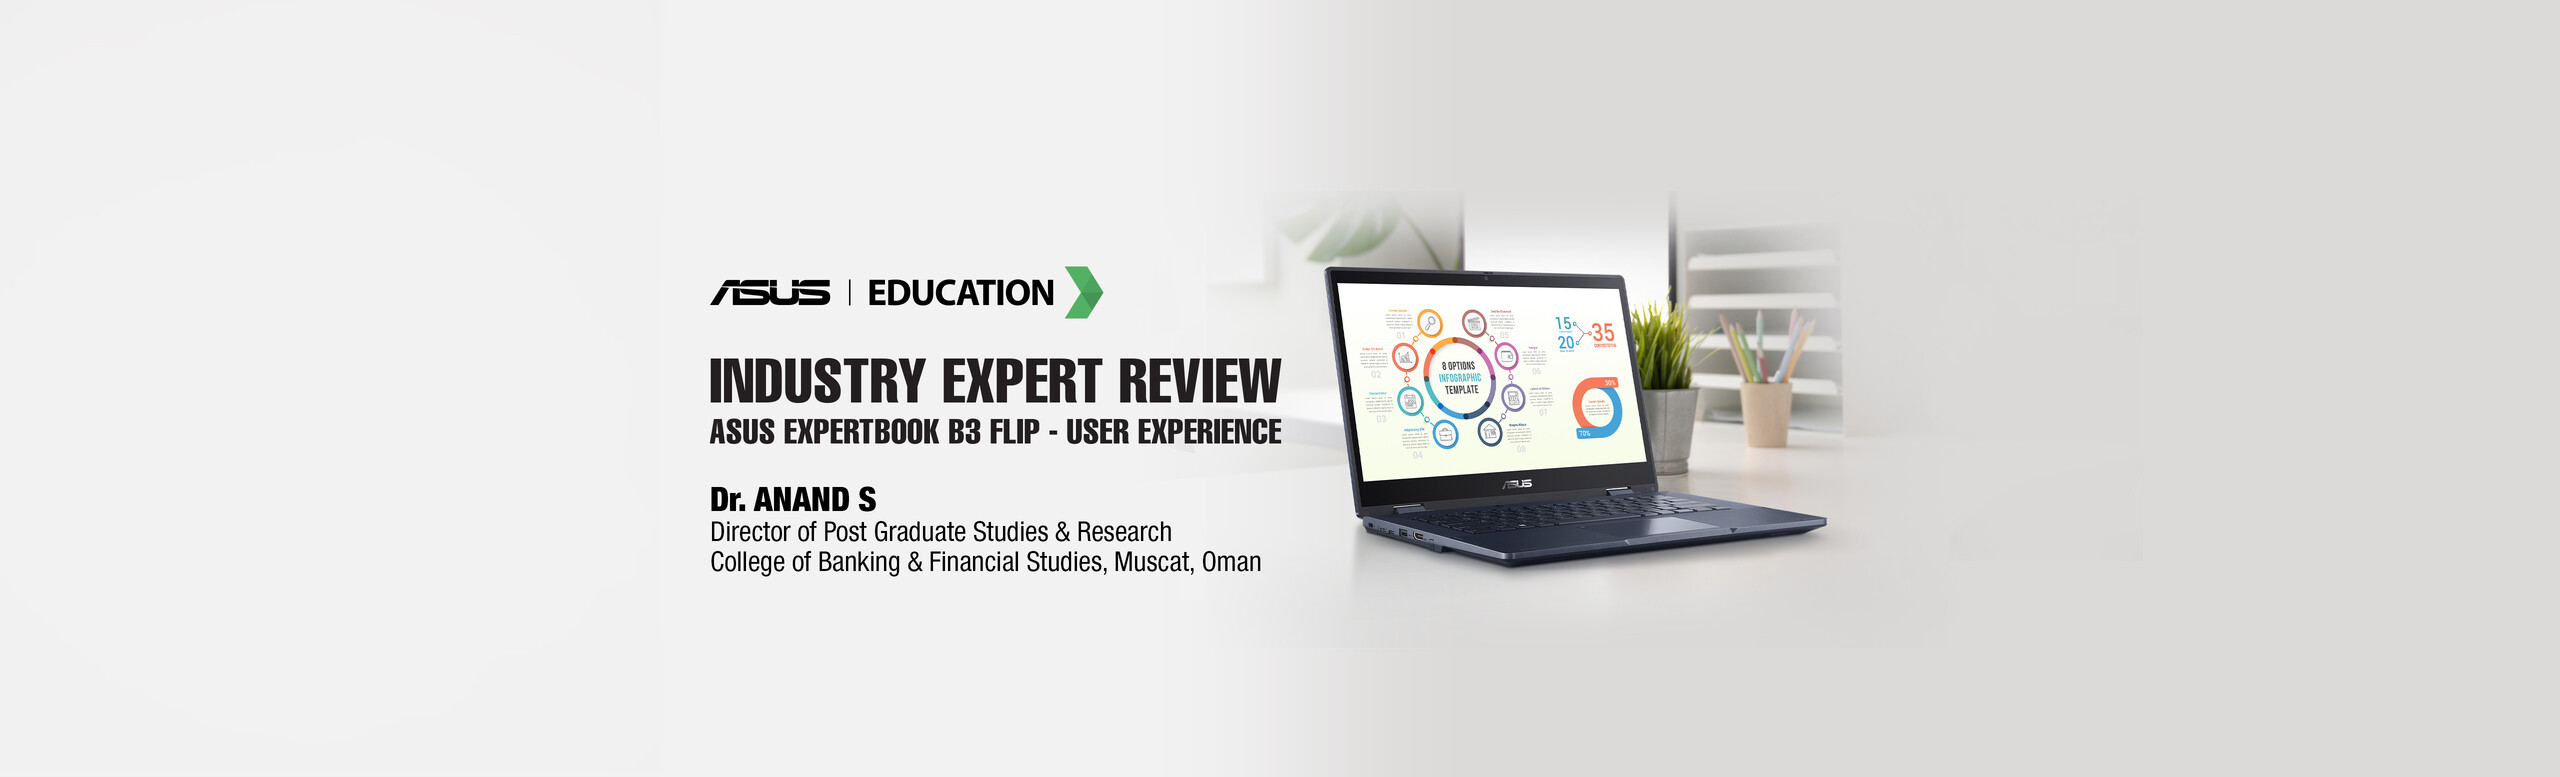 Industry Expert User review Dr. Anand S Launch Campaign